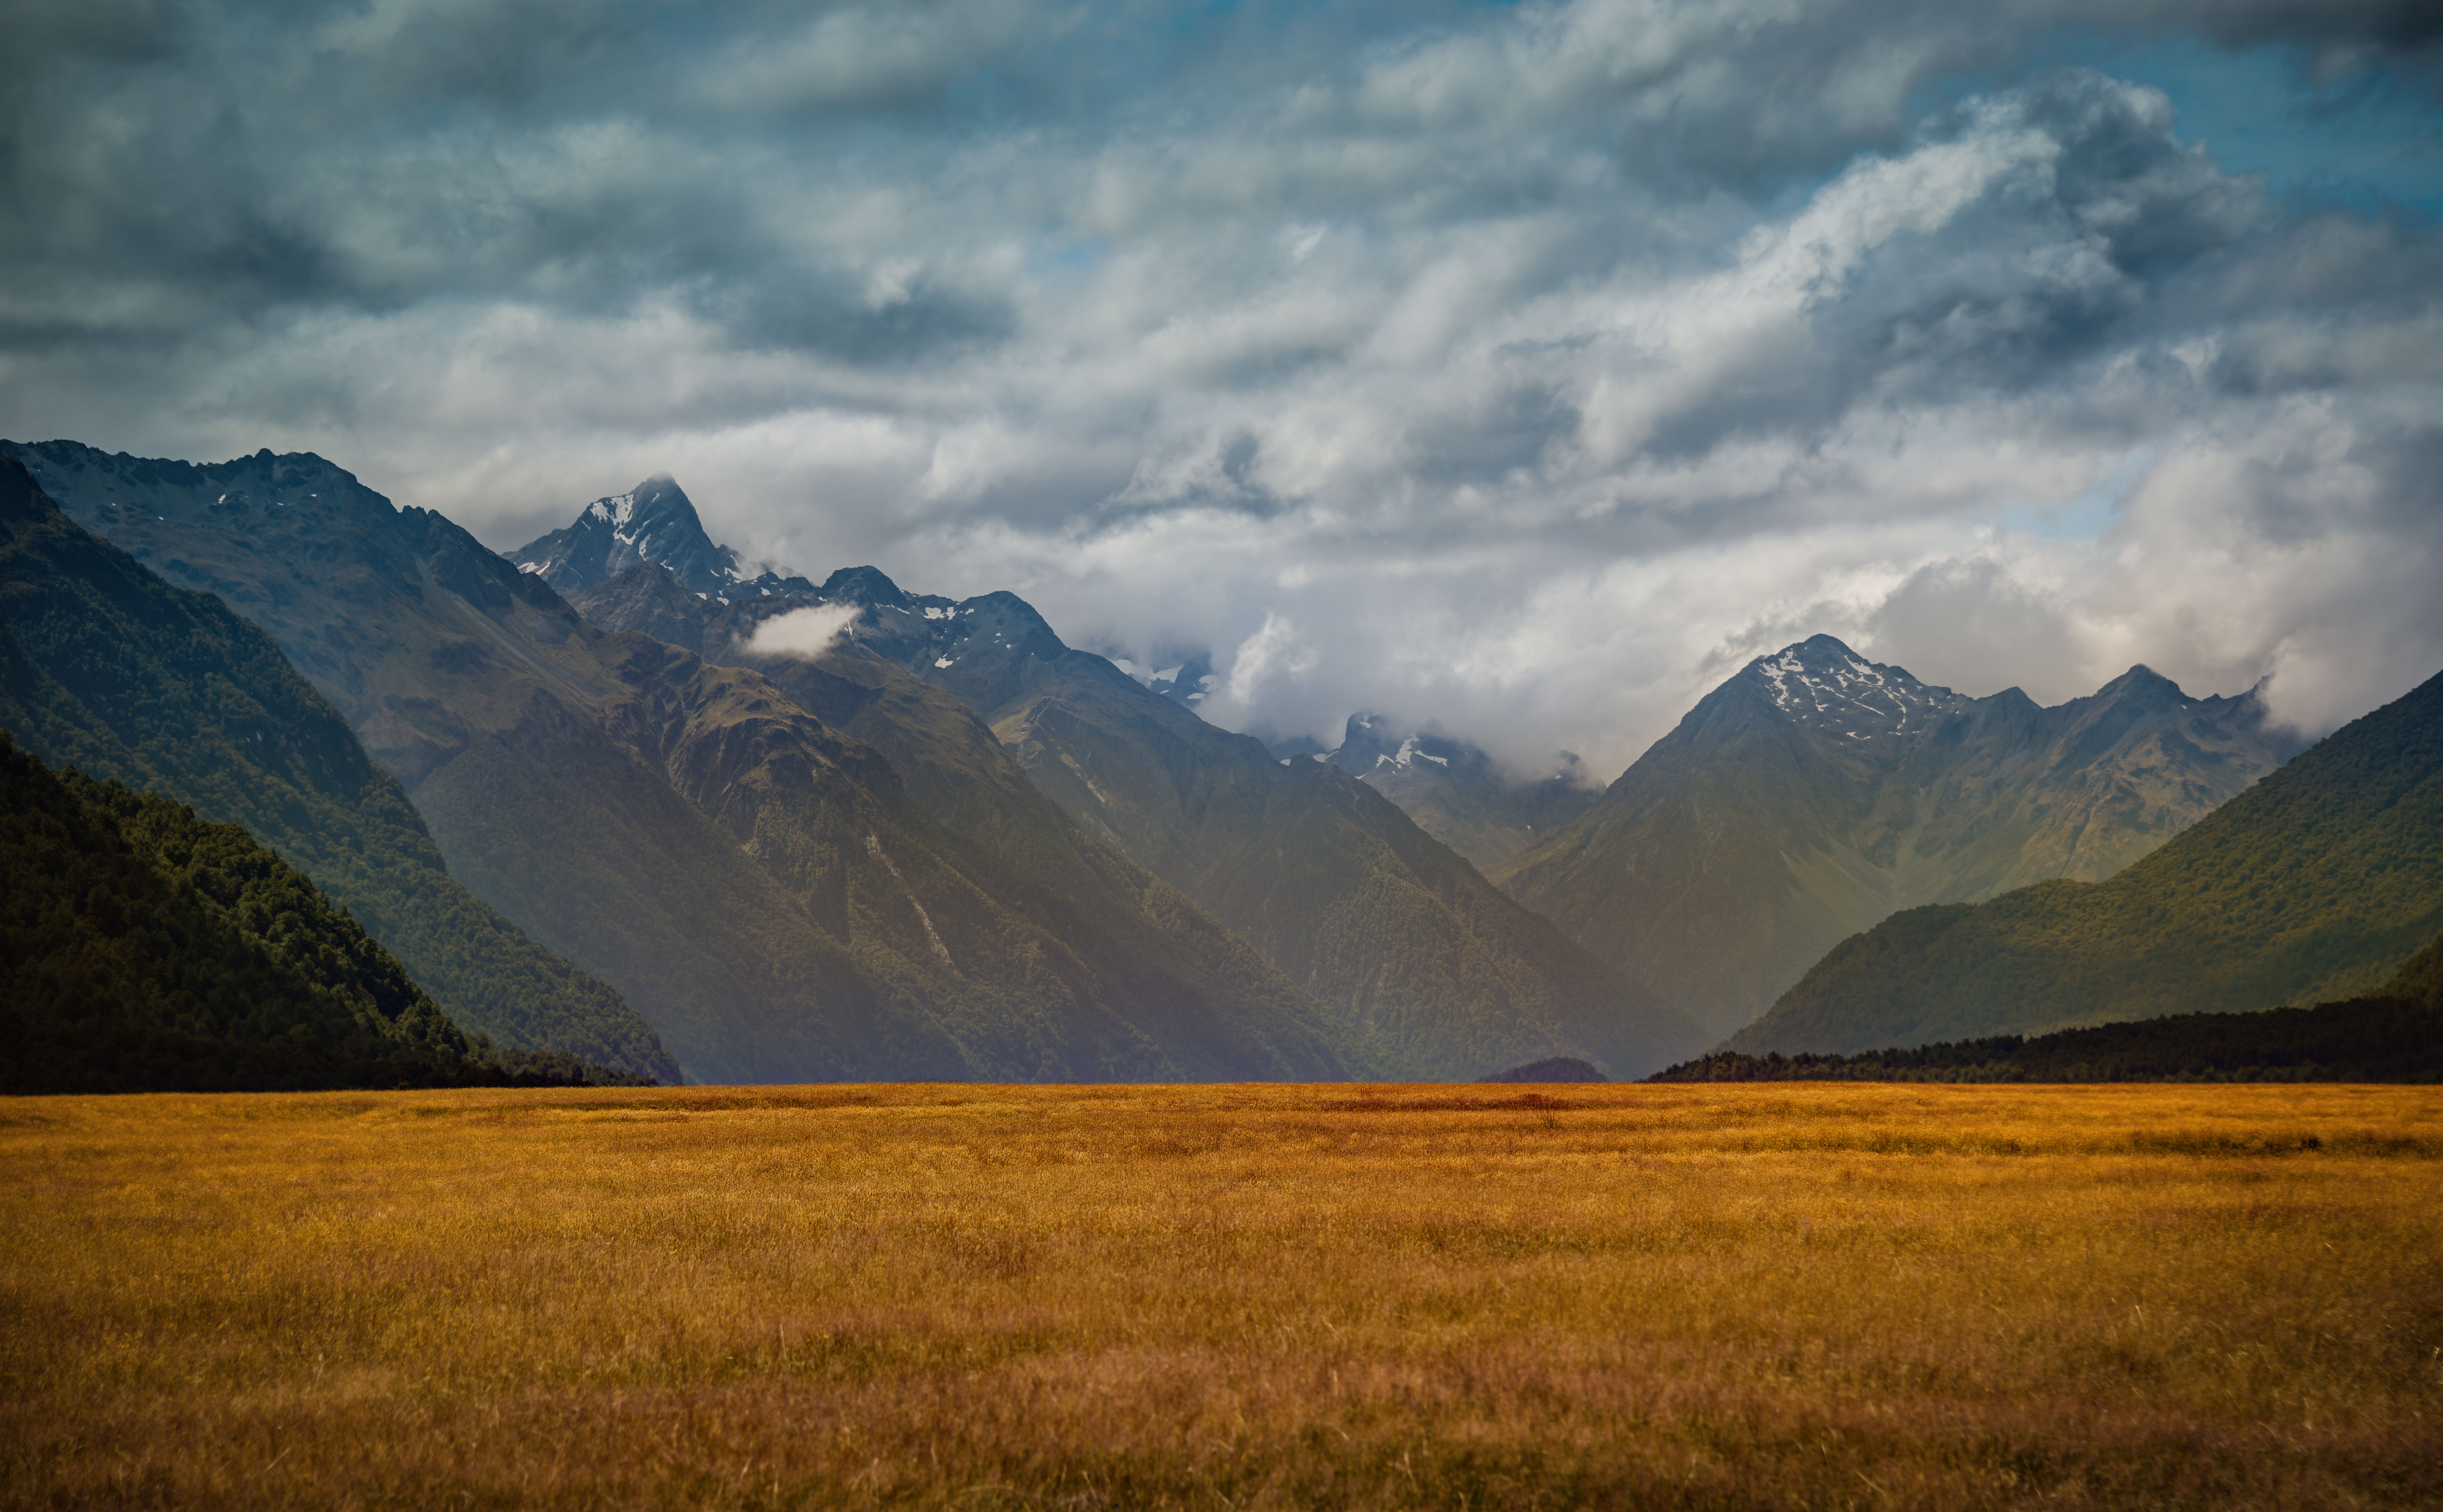 The Valley on the Way to Milford Sound by Trey Ratcliff